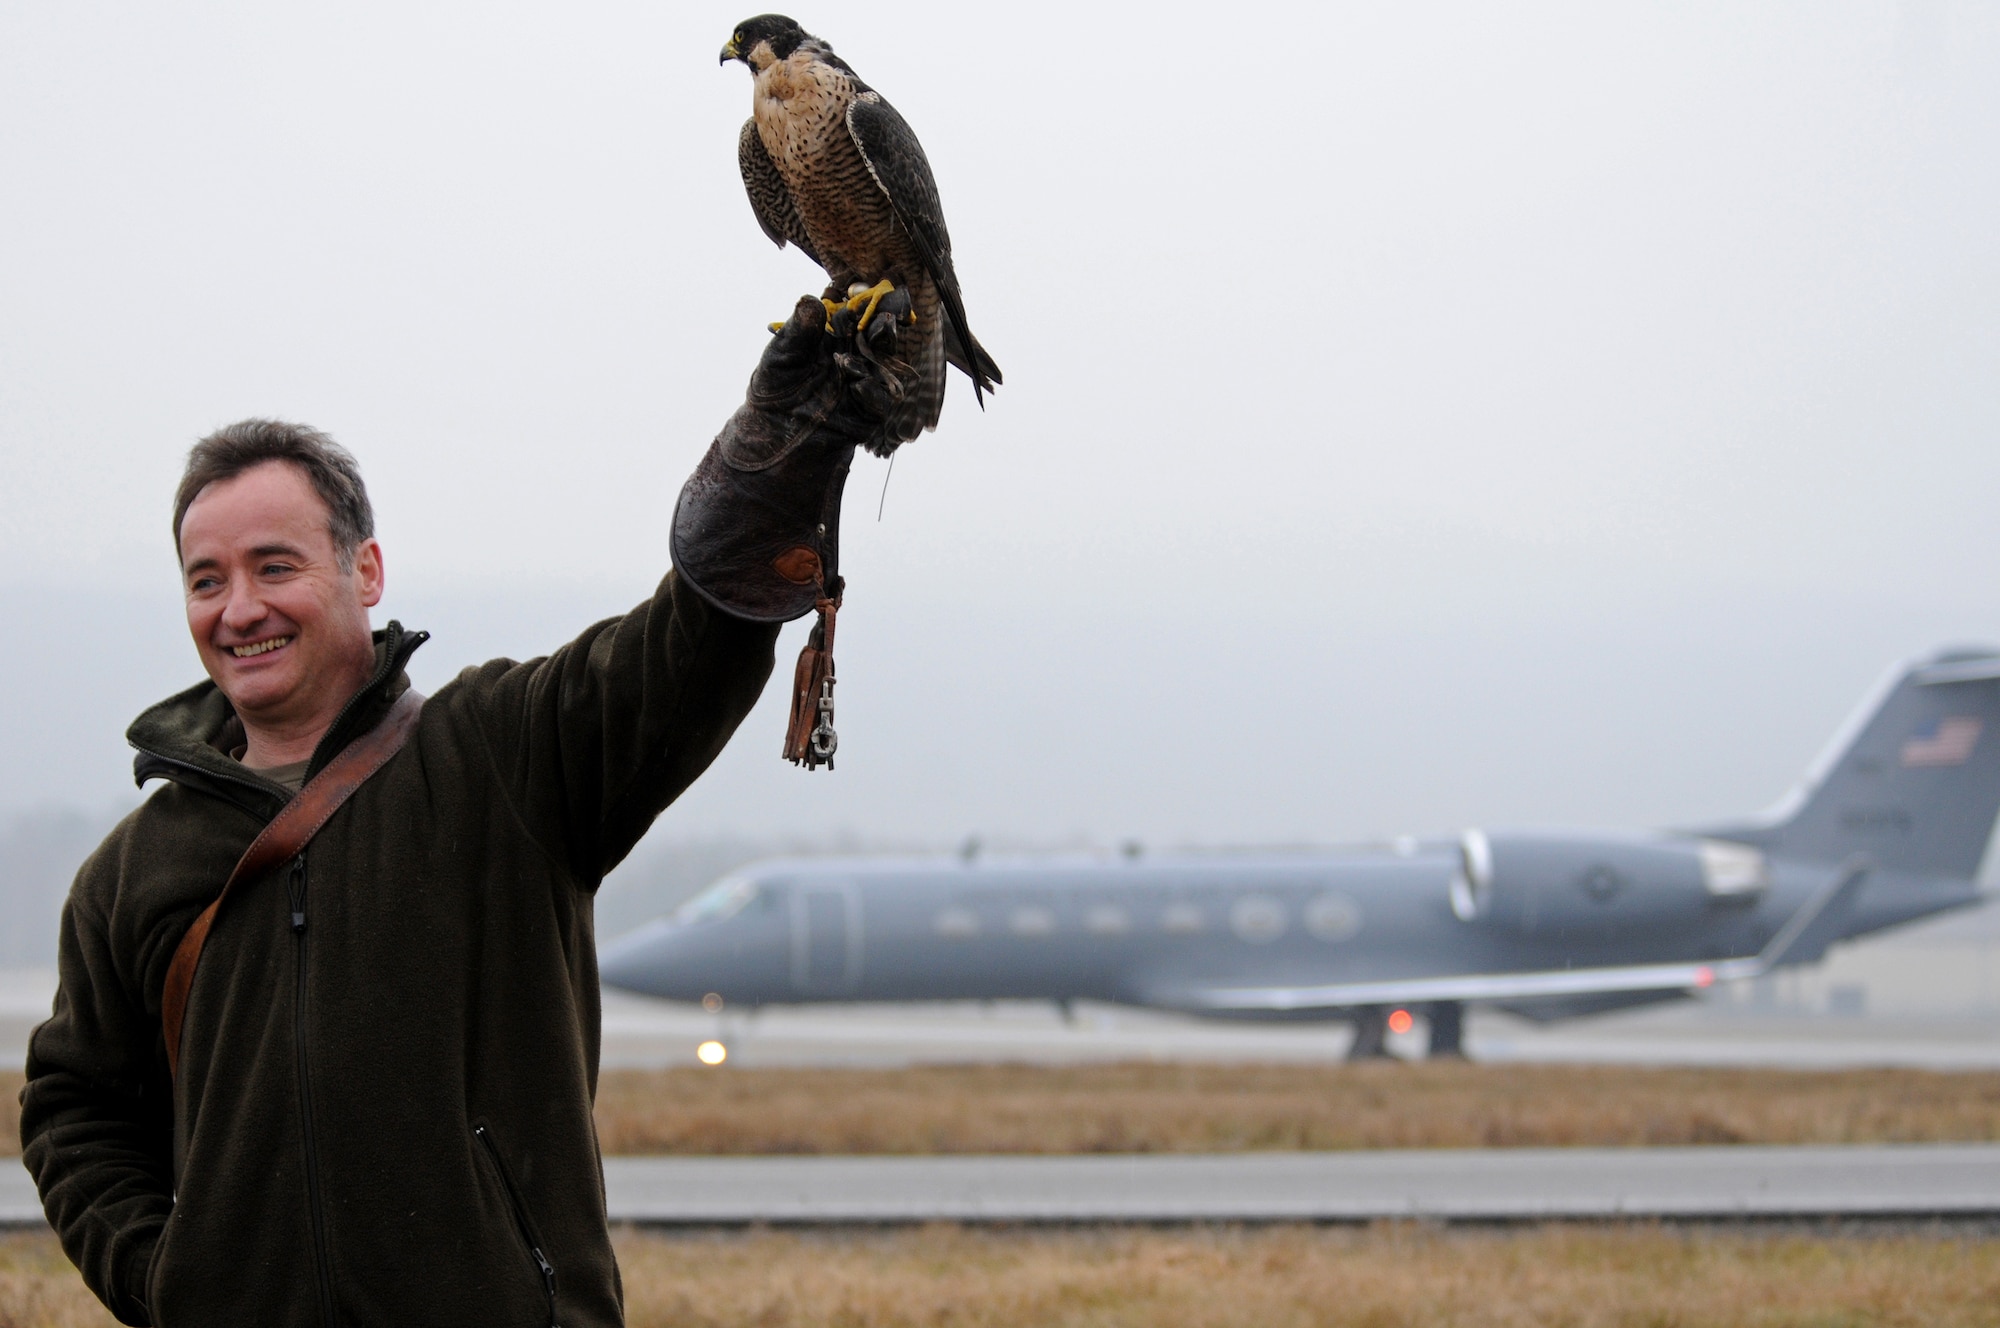 Charlie, a peregrine falcon, stands by with its handler for a call near the Ramstein Air Base flightline Feb. 4, 2009. Charlie scares all other birds off the flightline so they don't interfere with inbound or outbound flights. (U.S. Air Force photo by Airman 1st Class Grovert Fuentes-Contreras)